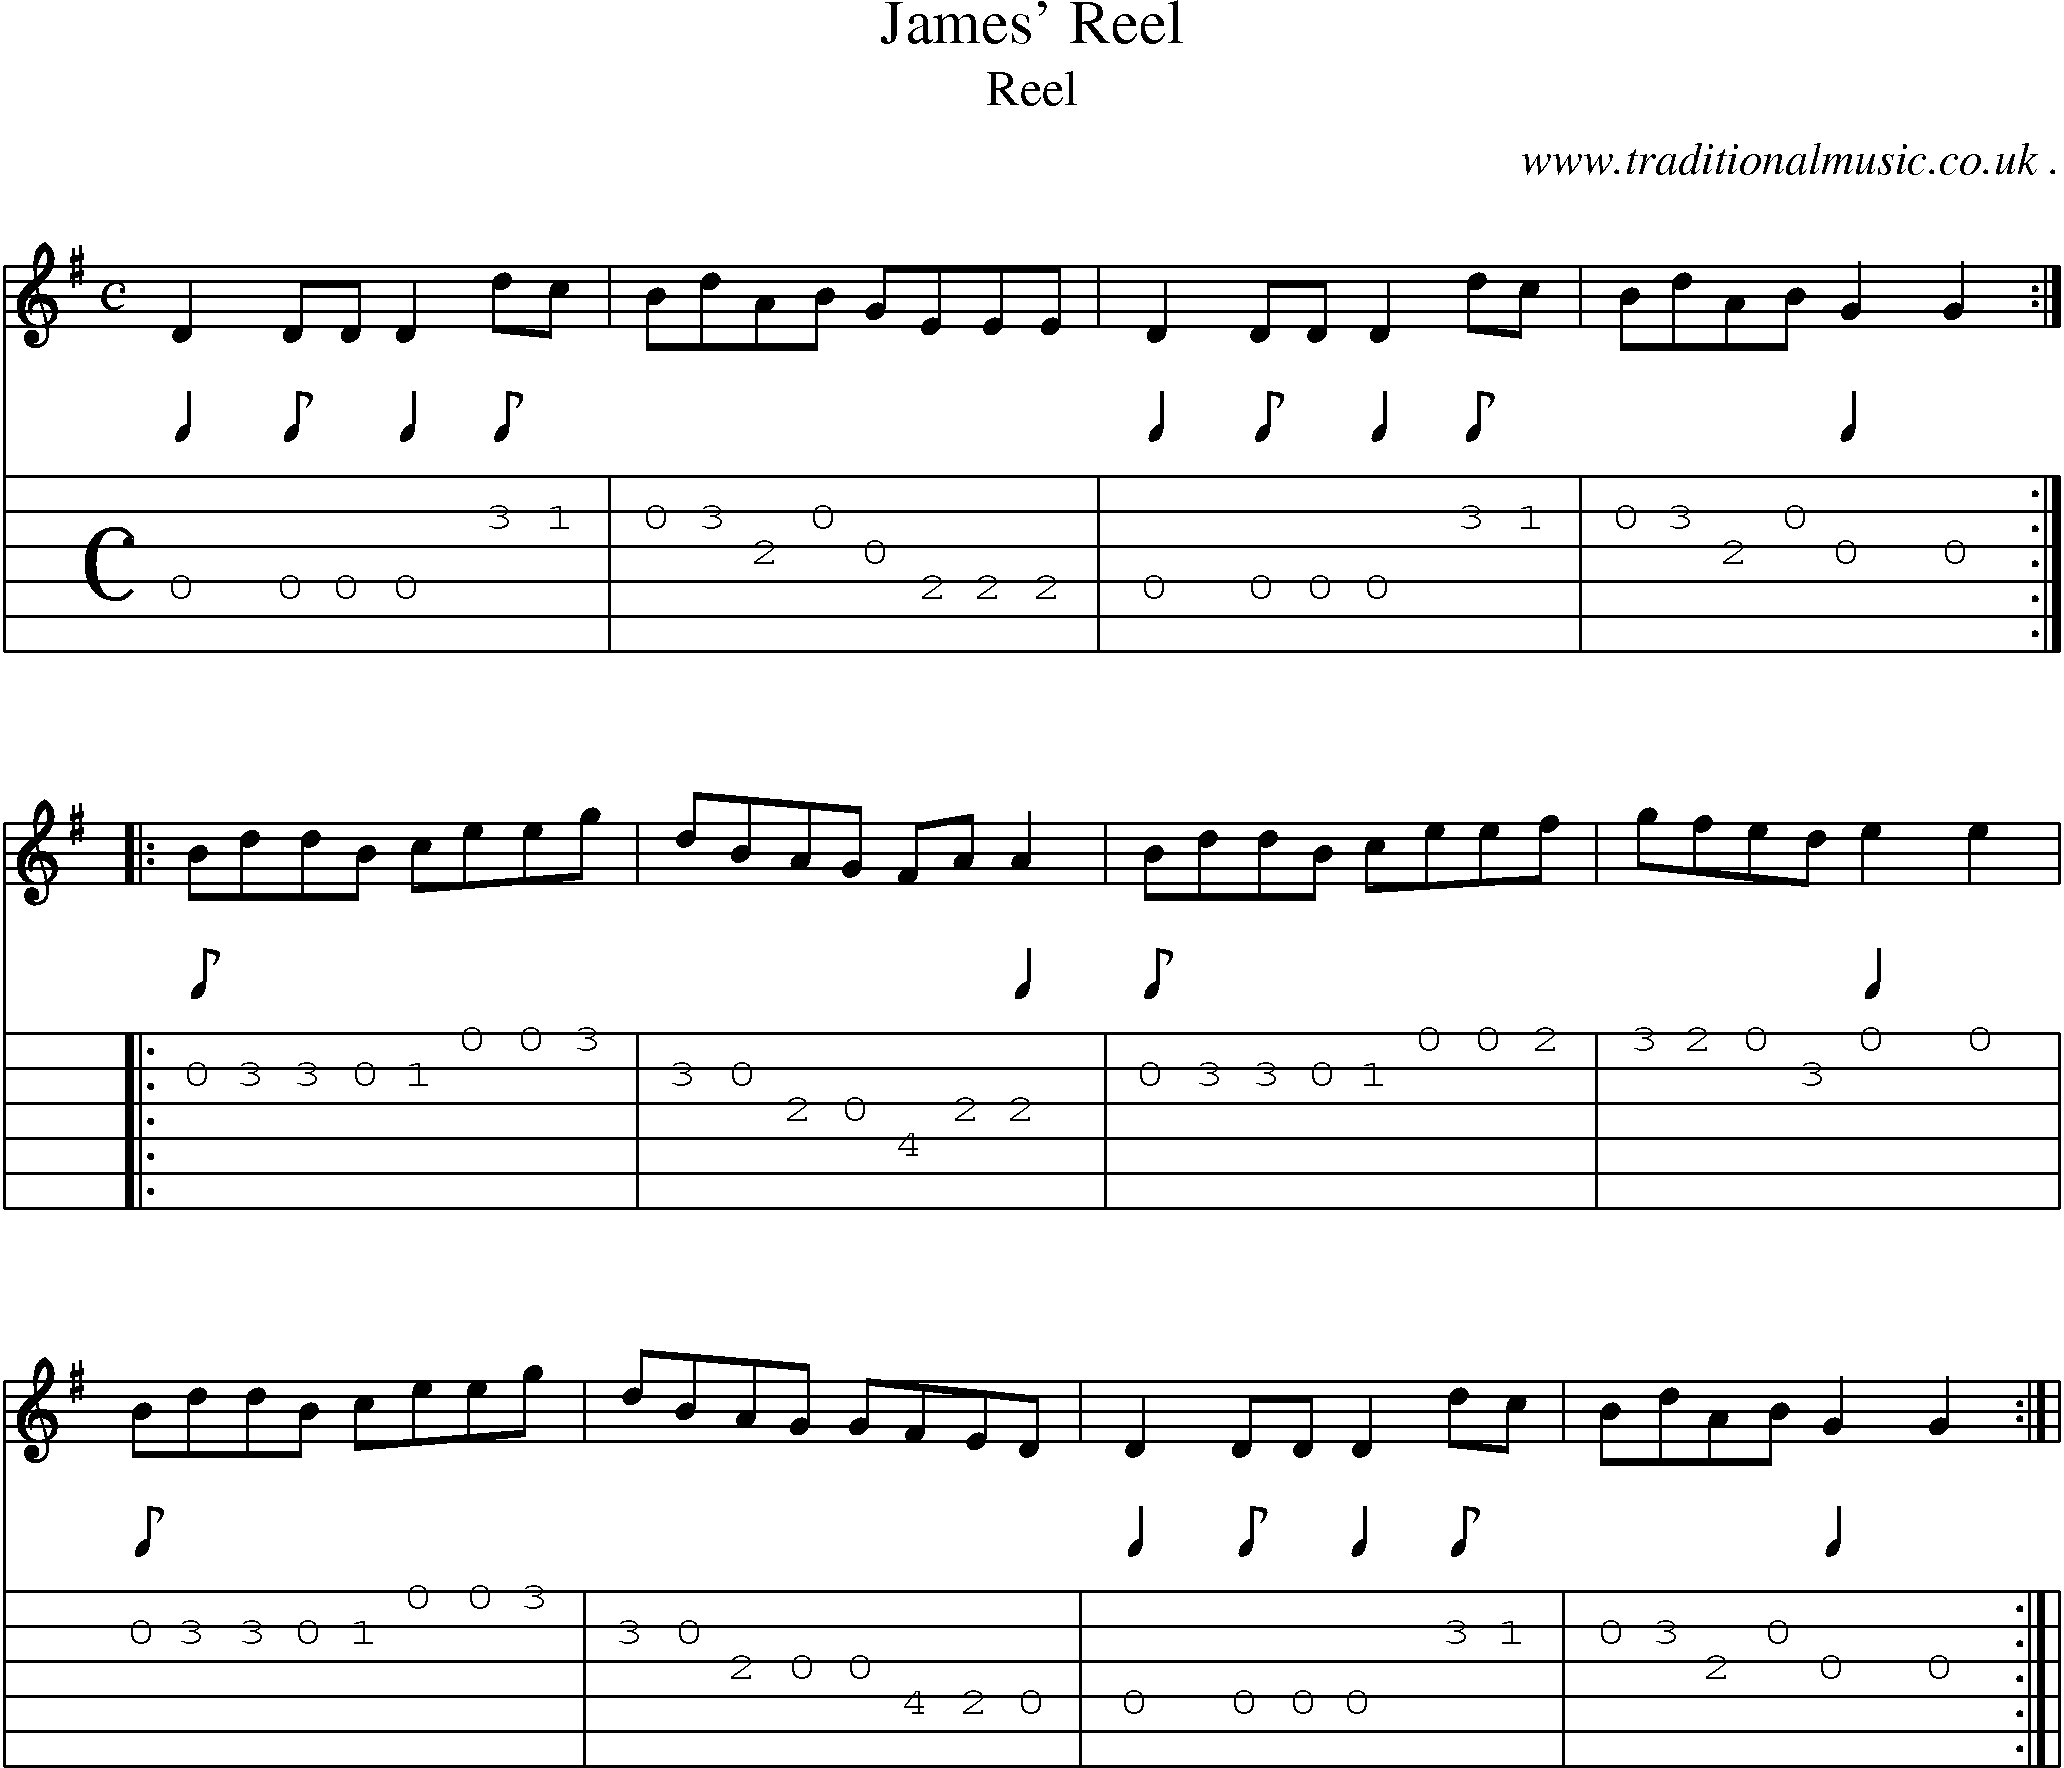 Sheet-Music and Guitar Tabs for James Reel